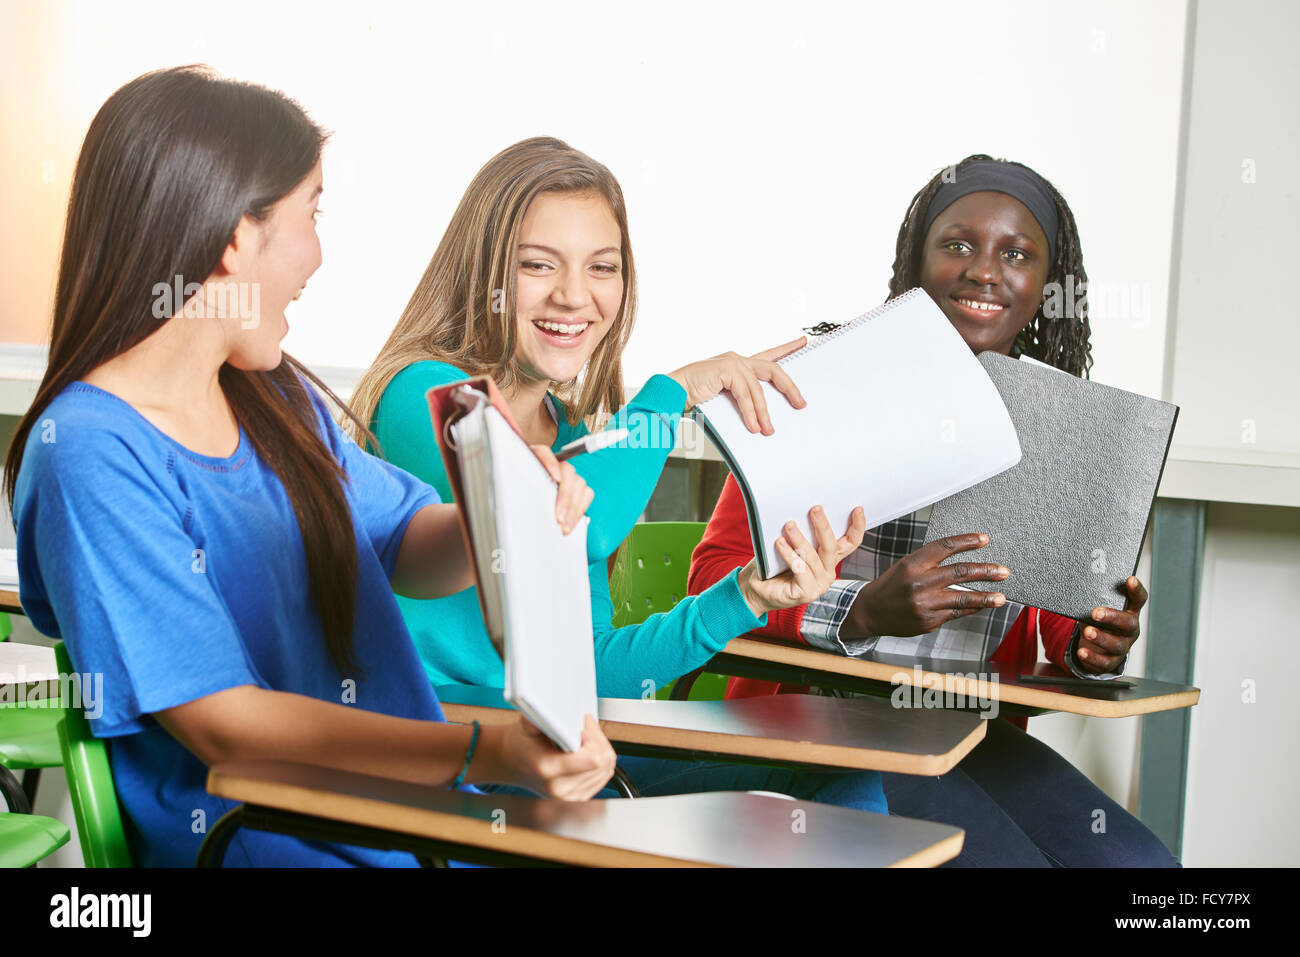 Interracial group of girls have fun at school Stock Photo